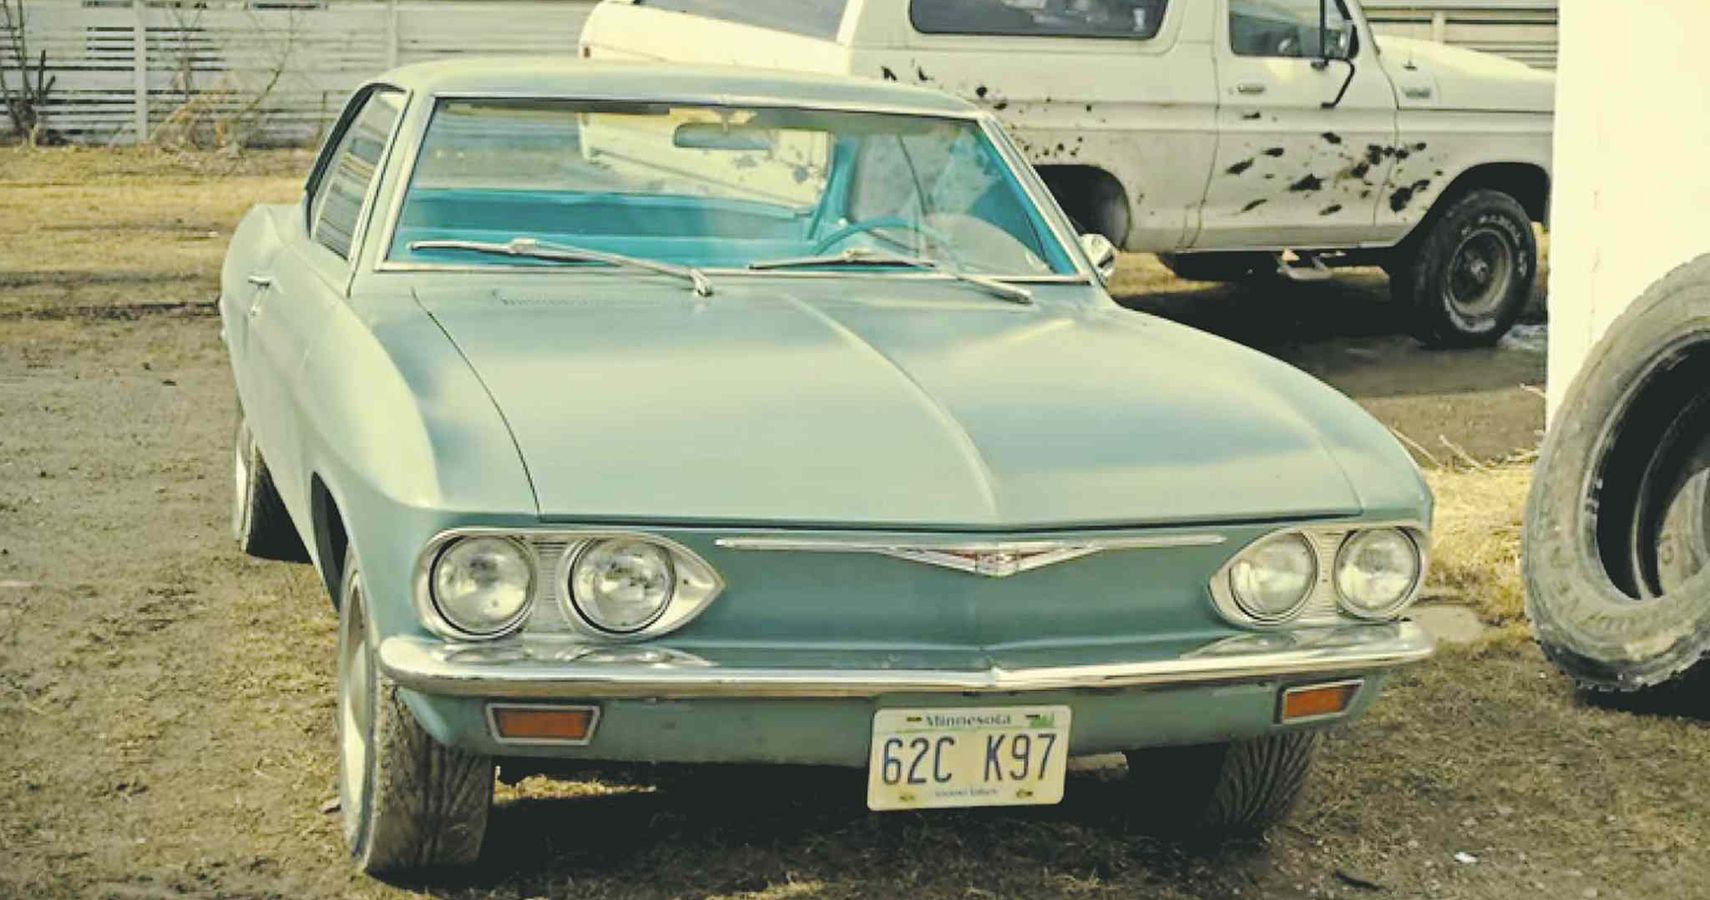 965 Chevy Corvair Fron the TV Series Fargo Definitely One Of The Star Cars Of The Show